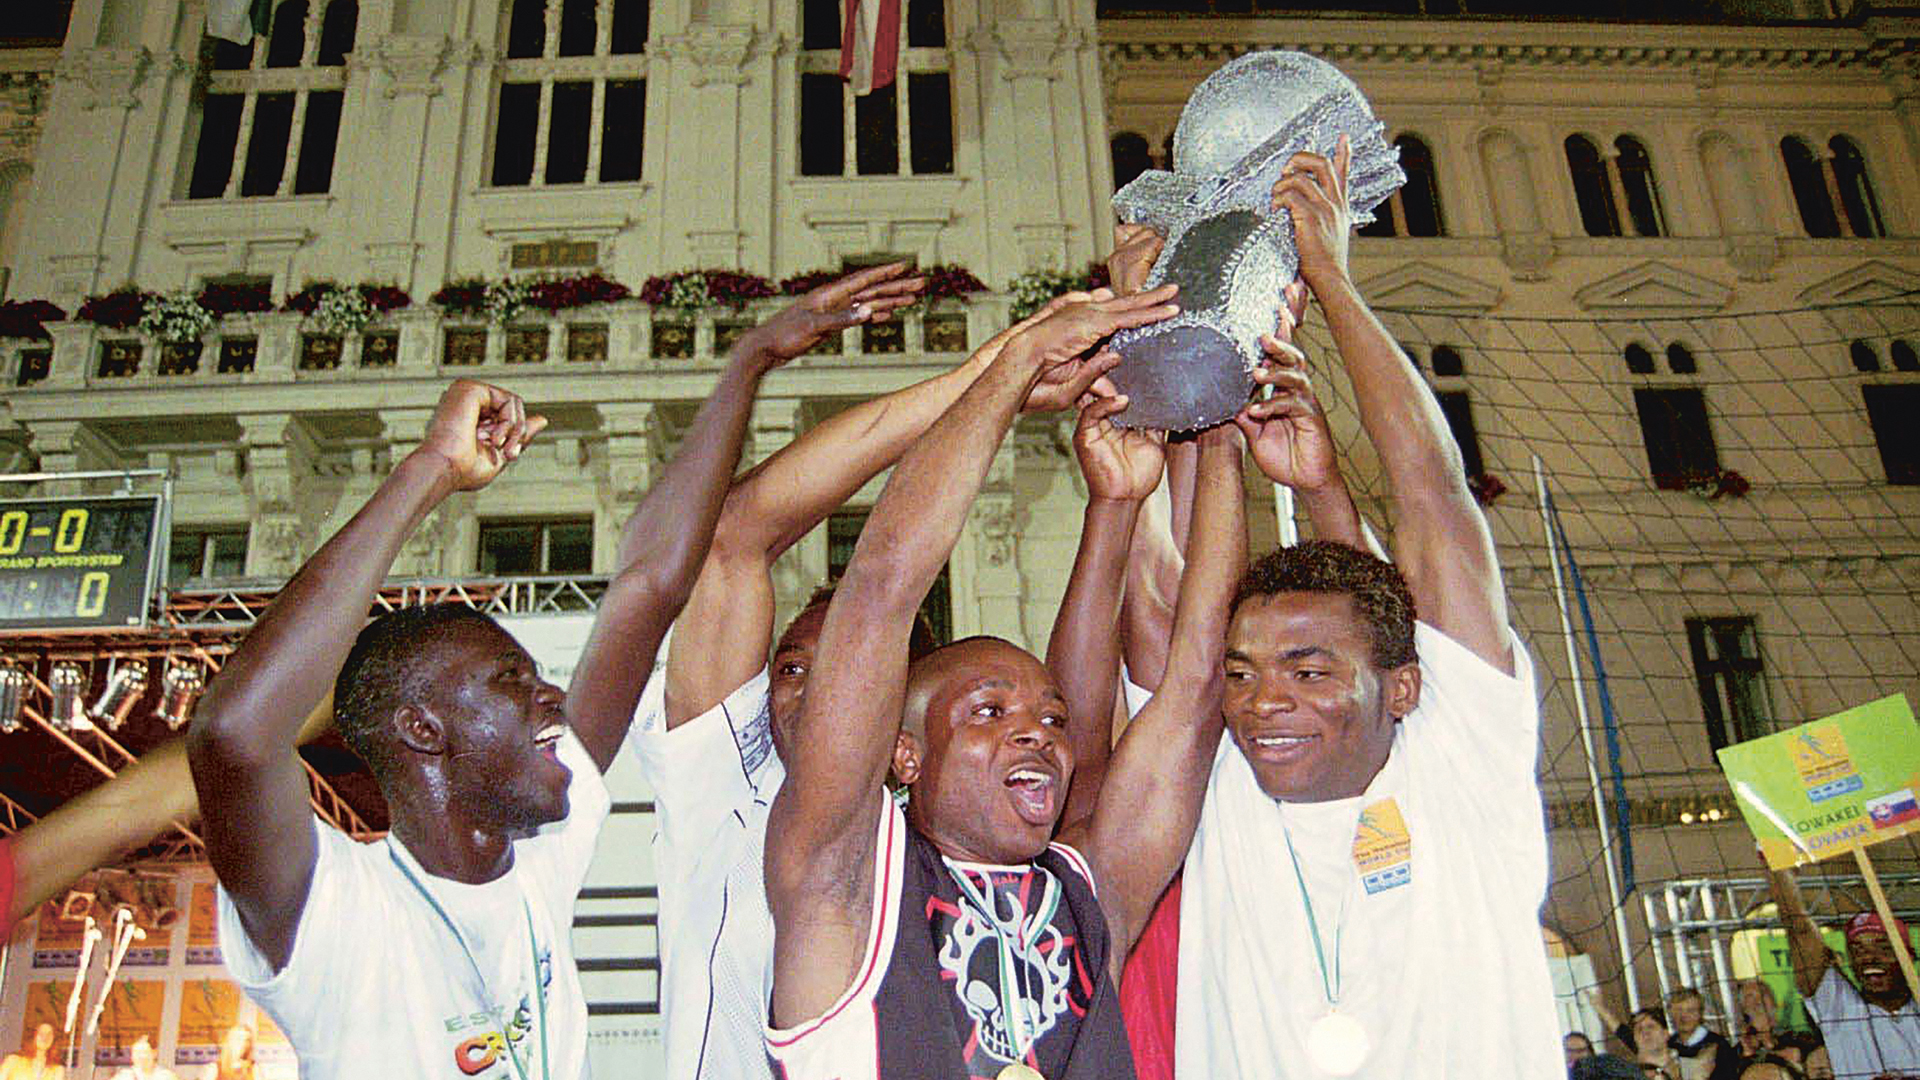 Players celebrate with a trophy